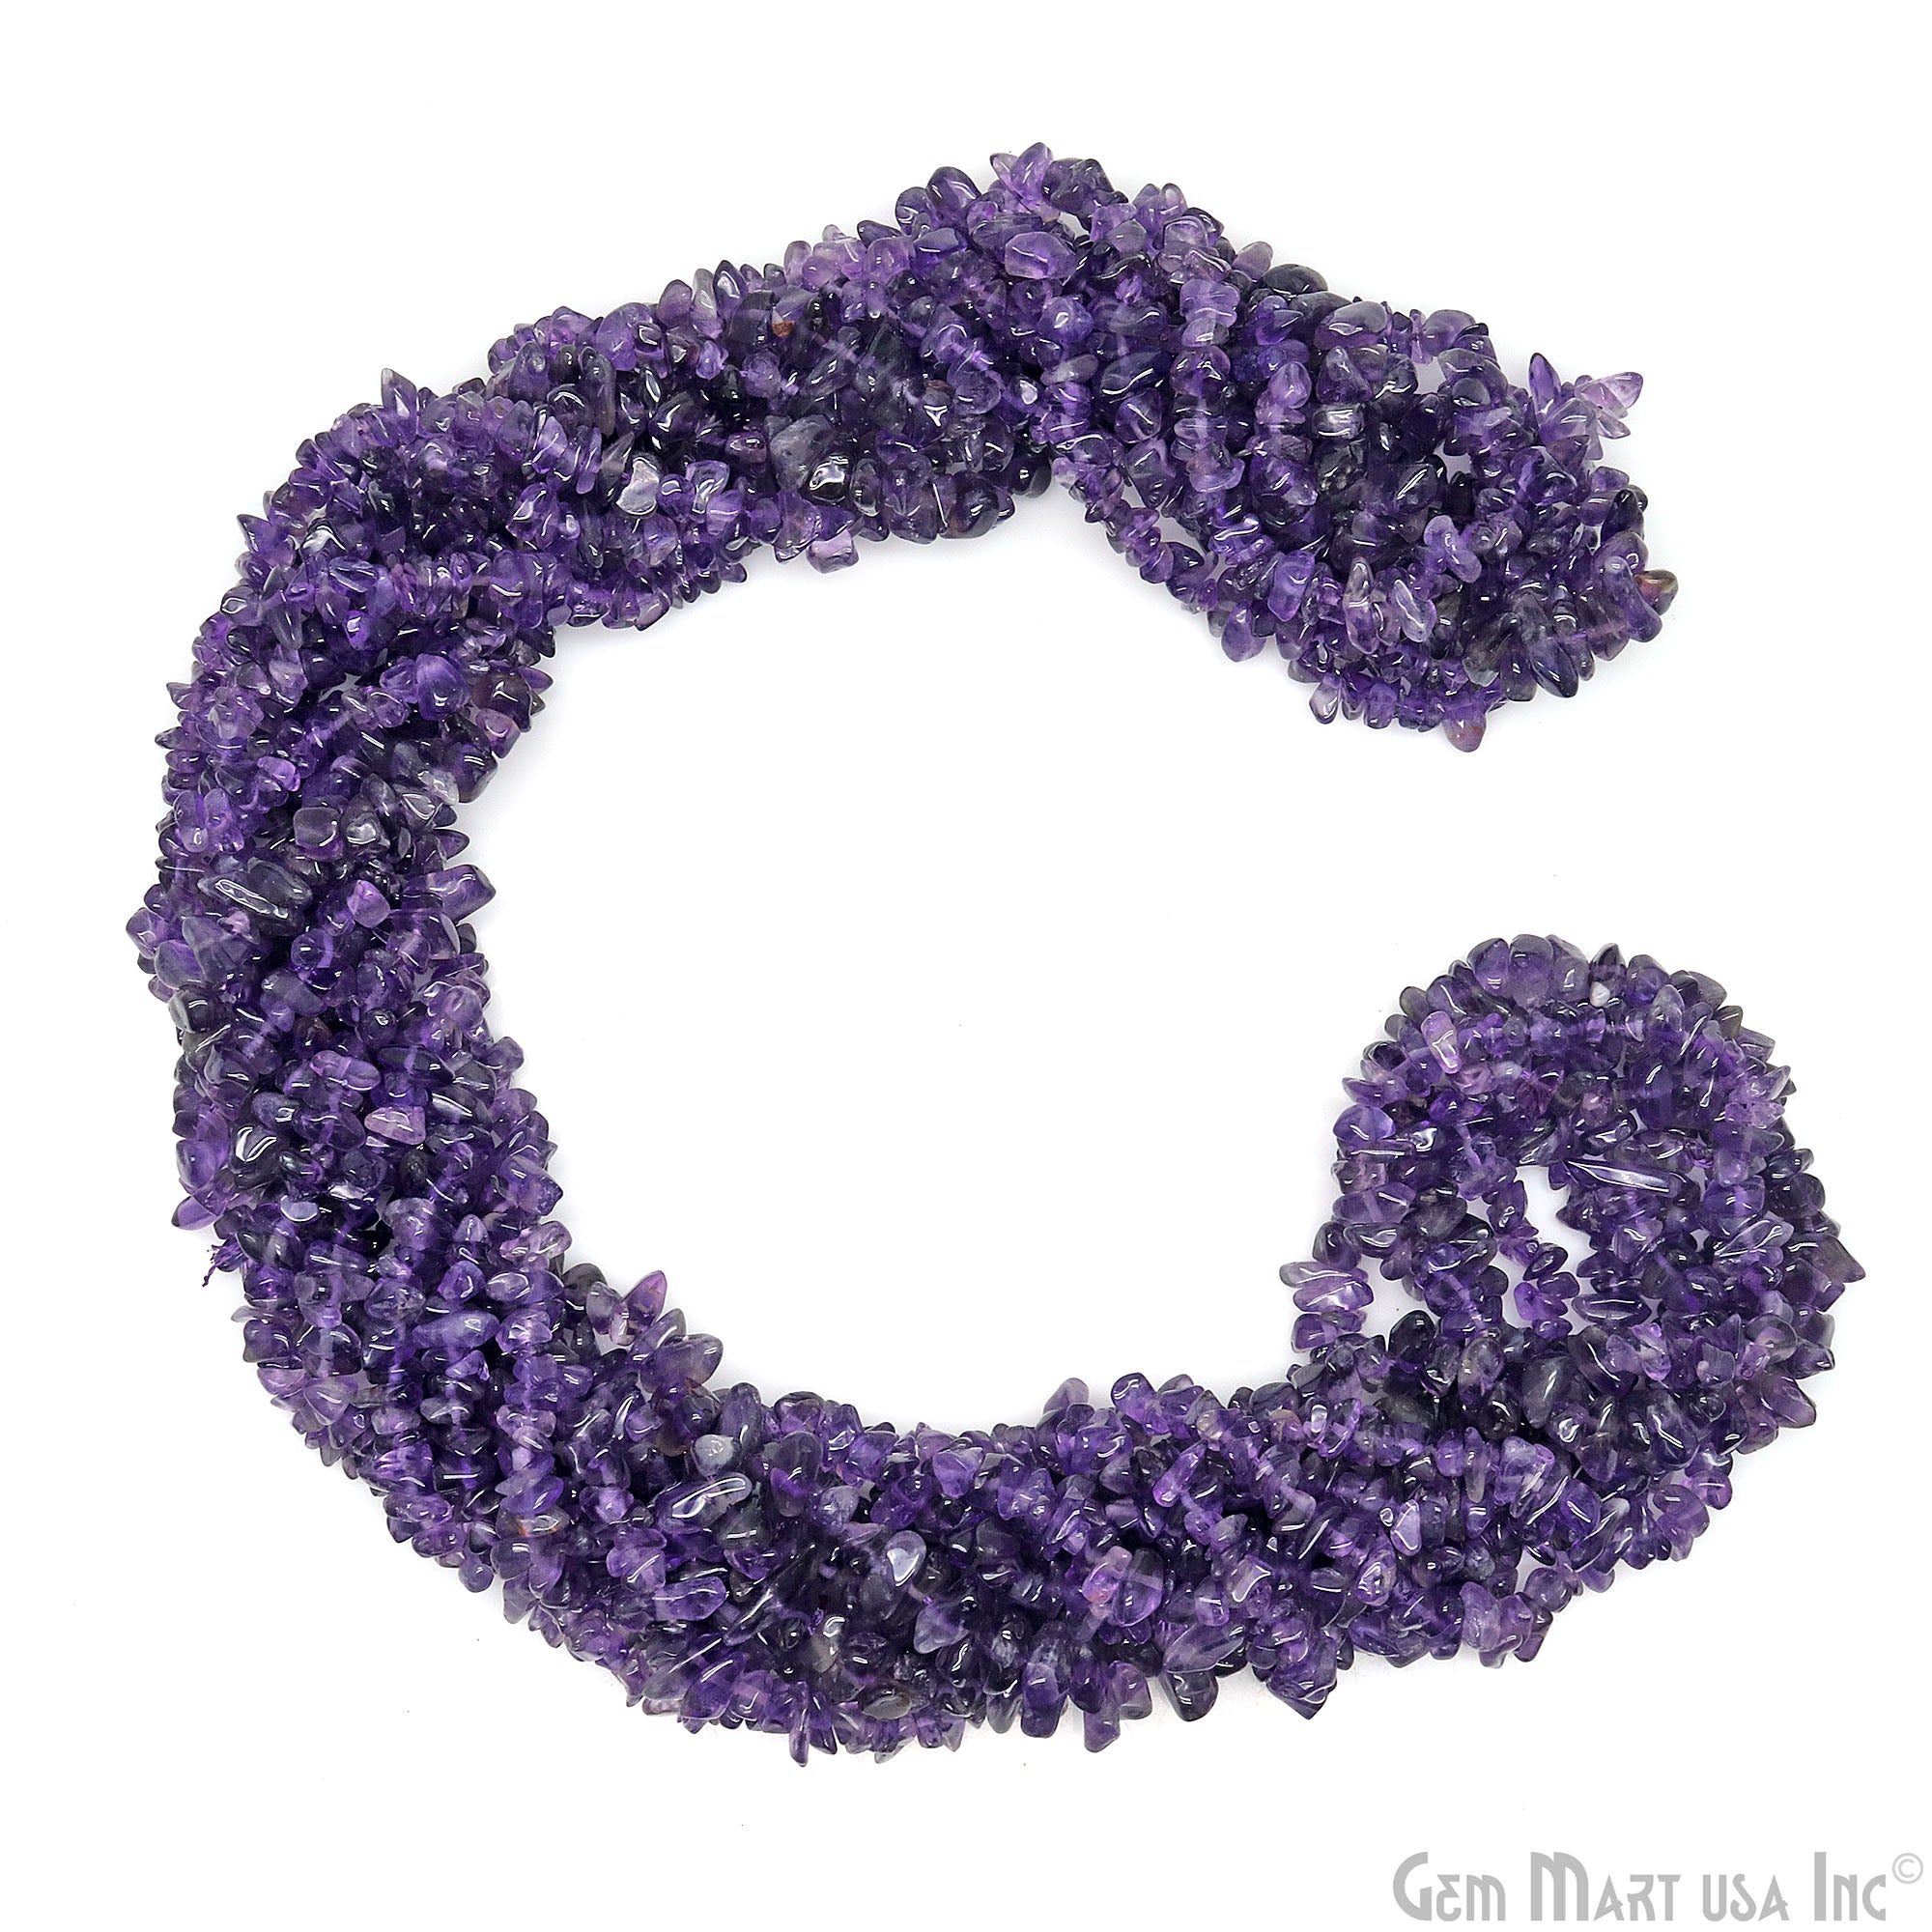 Natural Amethyst chip Gemstone stone beads 1 full strand 34 inch Wholesale Price (CHAA-70001) (762203930671)